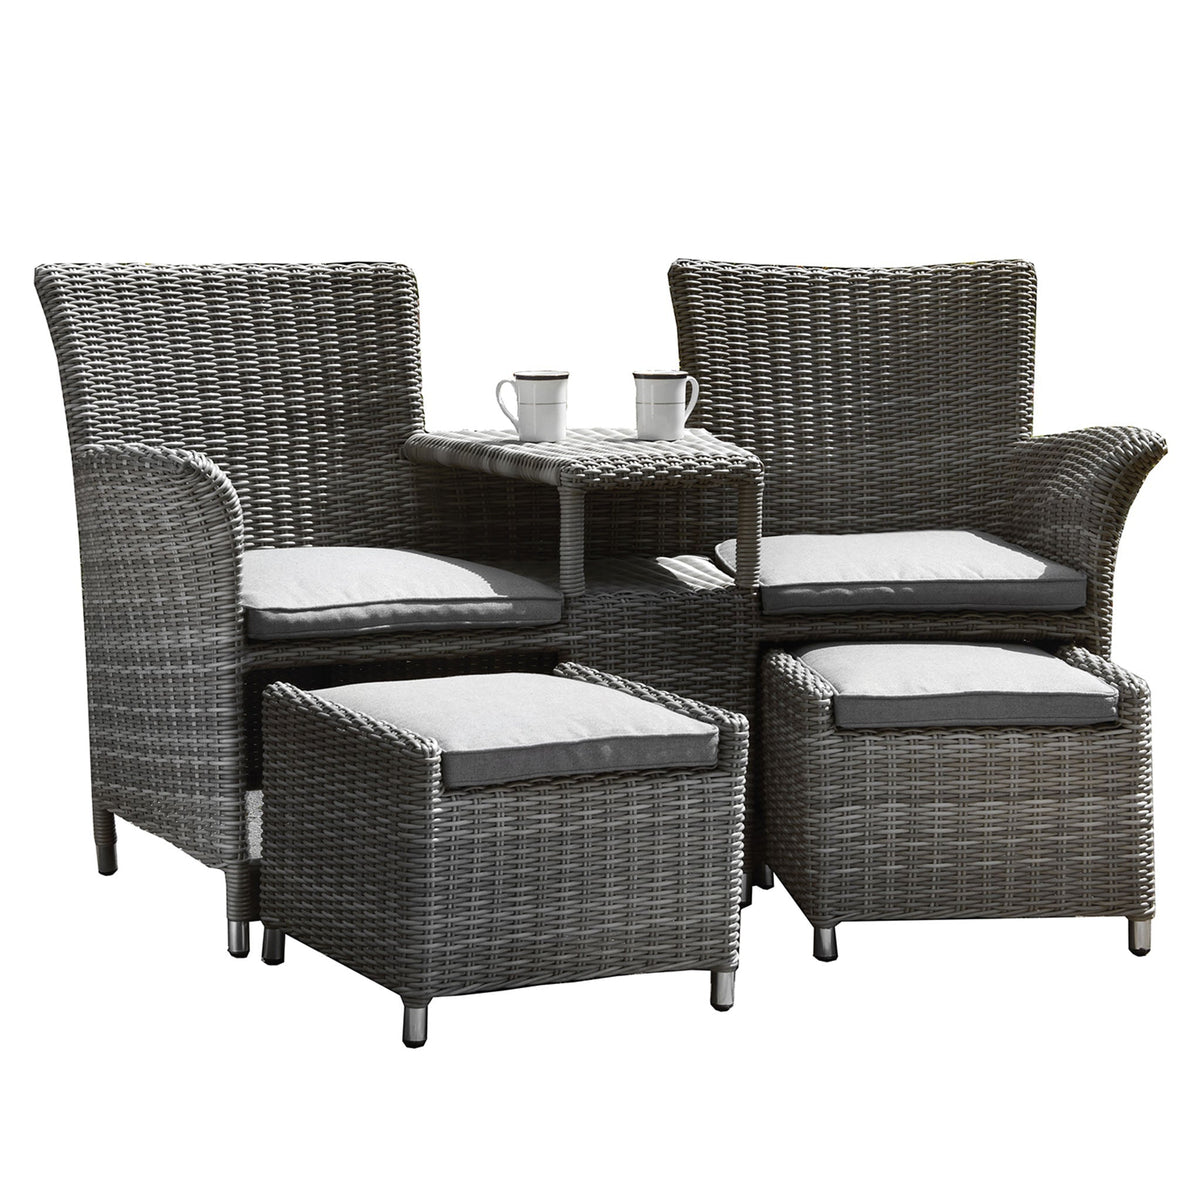 Paris Deluxe Rattan Companion Love Seat Set from Roseland Home Furniture